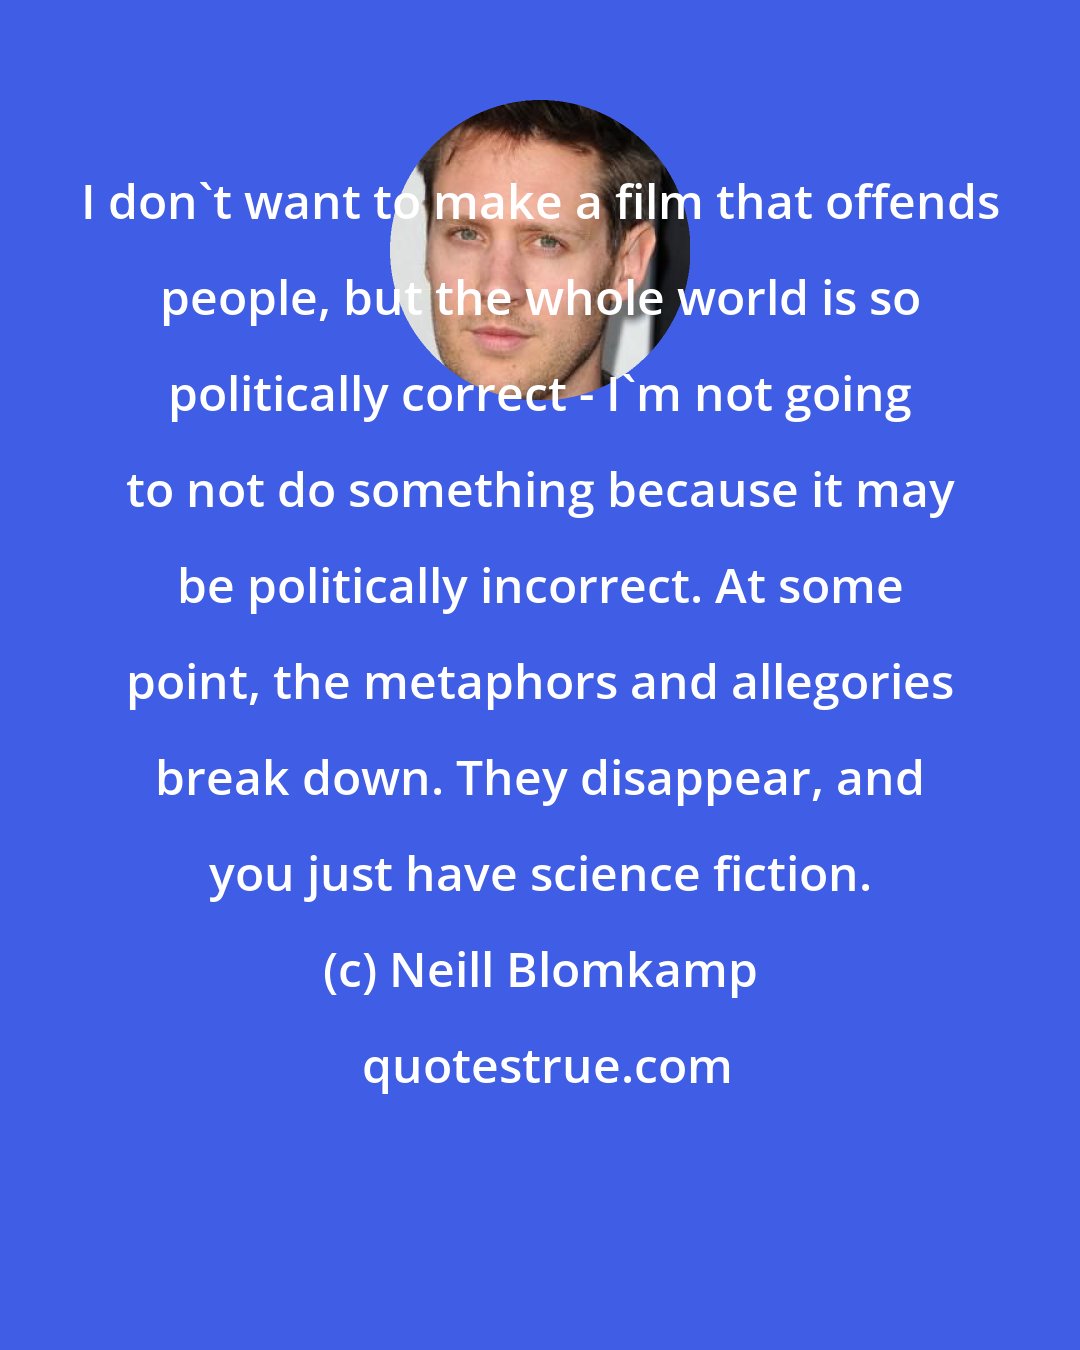 Neill Blomkamp: I don't want to make a film that offends people, but the whole world is so politically correct - I'm not going to not do something because it may be politically incorrect. At some point, the metaphors and allegories break down. They disappear, and you just have science fiction.